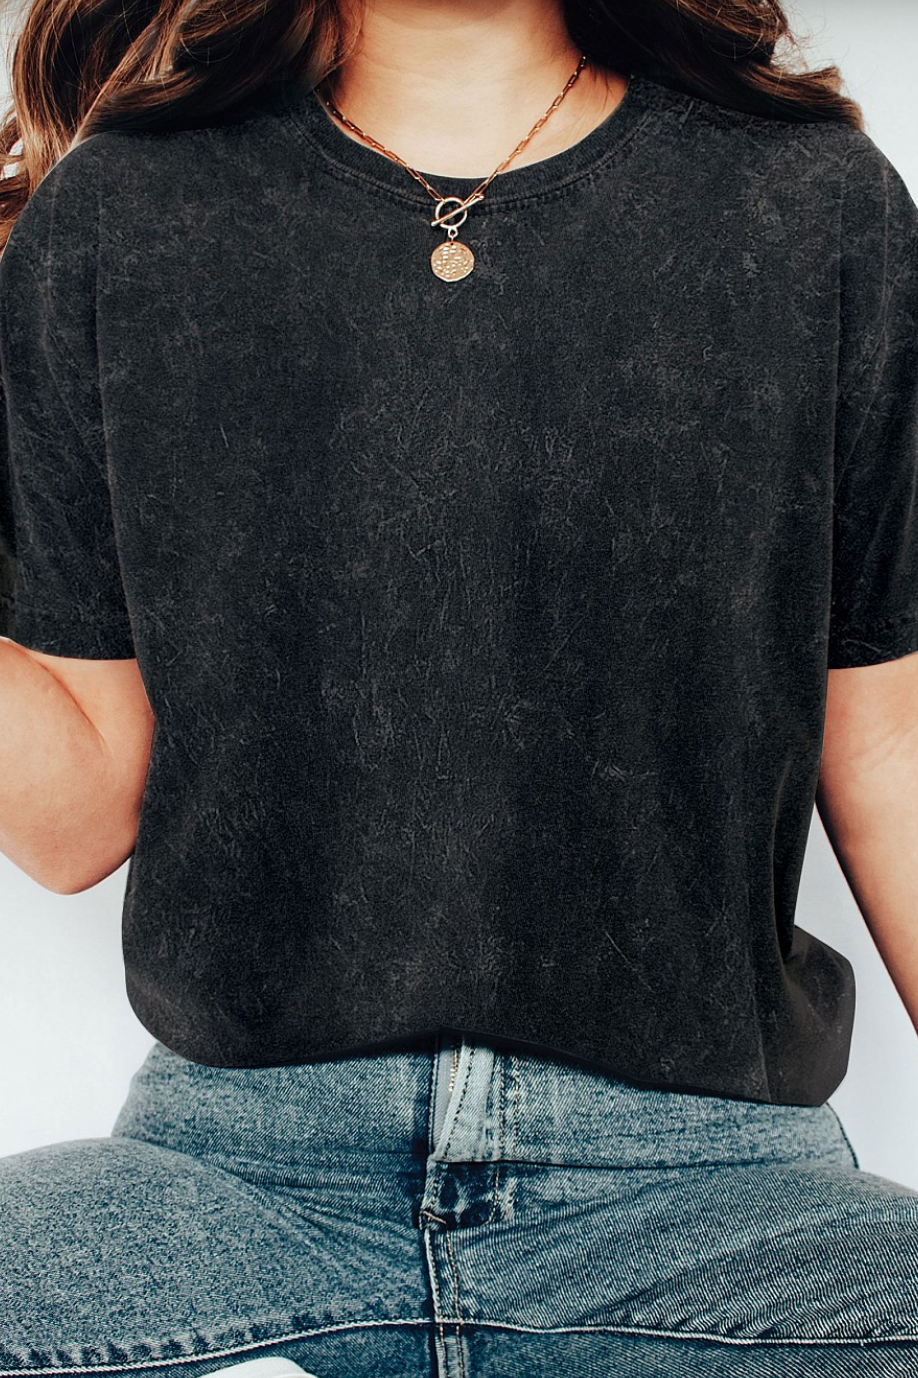 Mineral Washed T-Shirt Black / Small Black Small Shirts & Tops Rustee Clothing- Tilden Co.